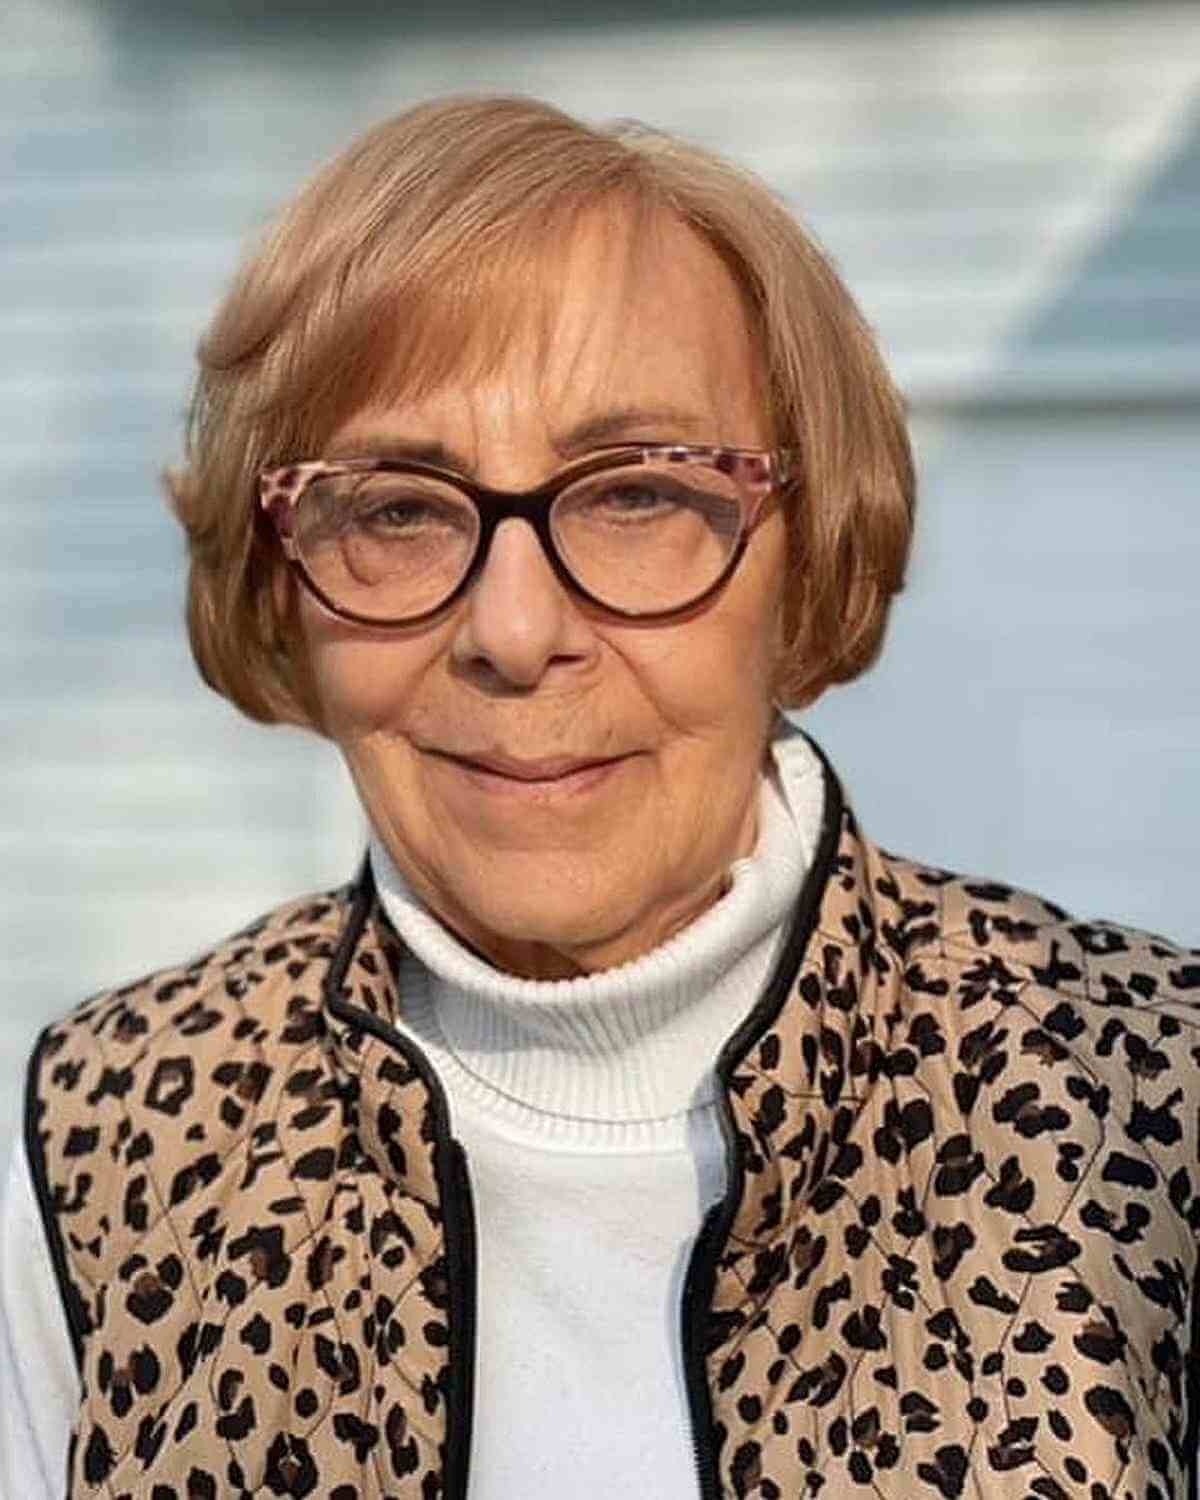 Ear-Length Soft Bob with Side-Swept Bangs for 60-Year-Olds with Glasses